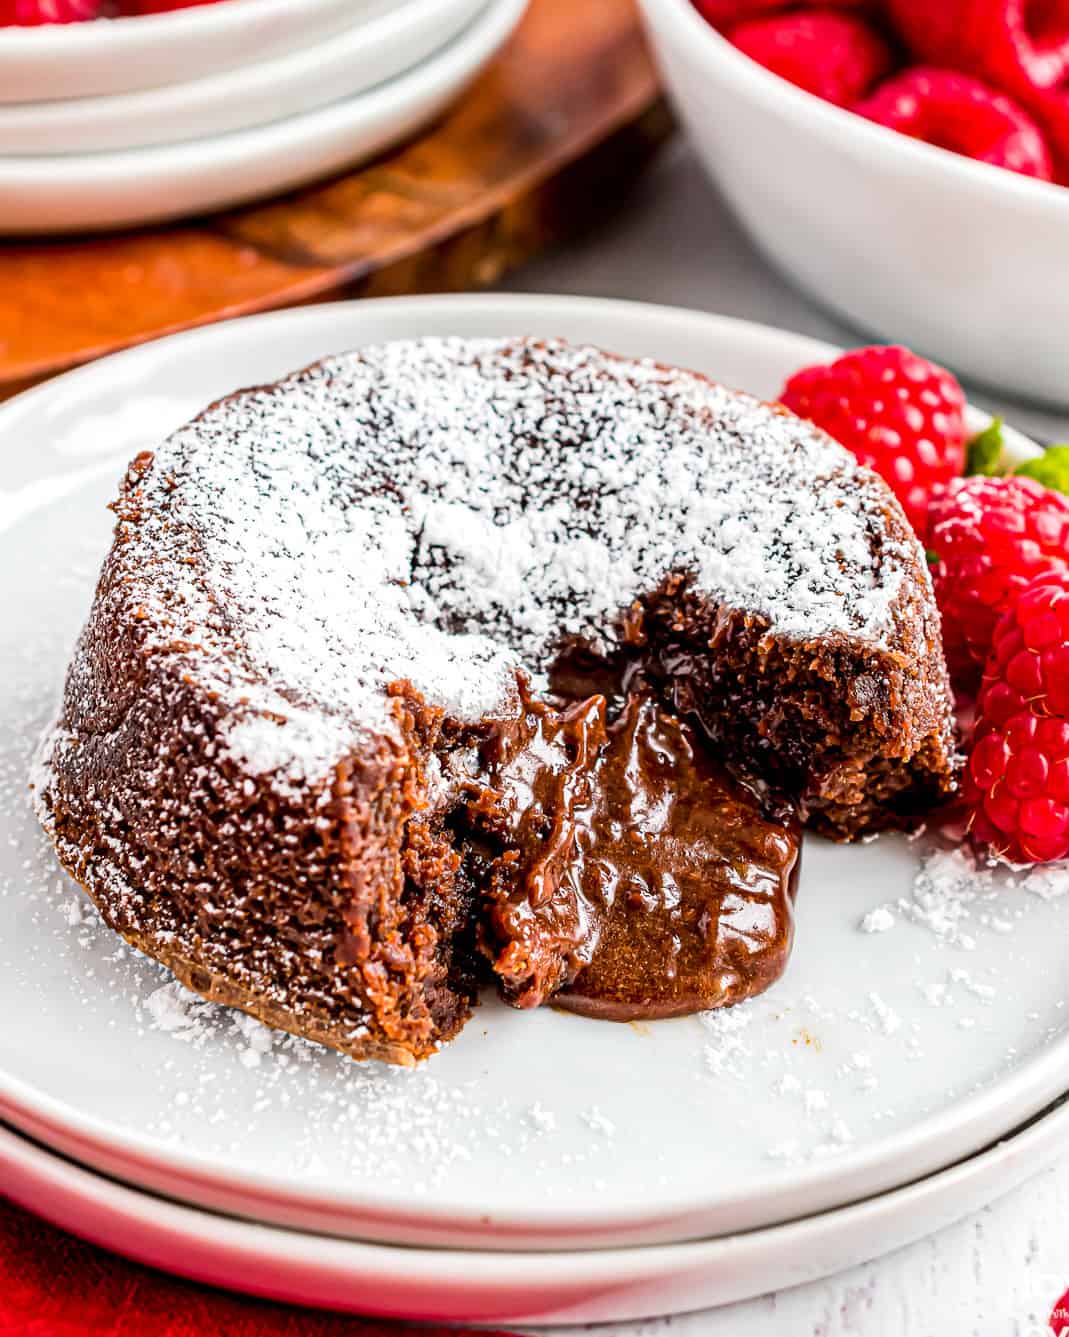 A molten chocolate lava cake with raspberries.